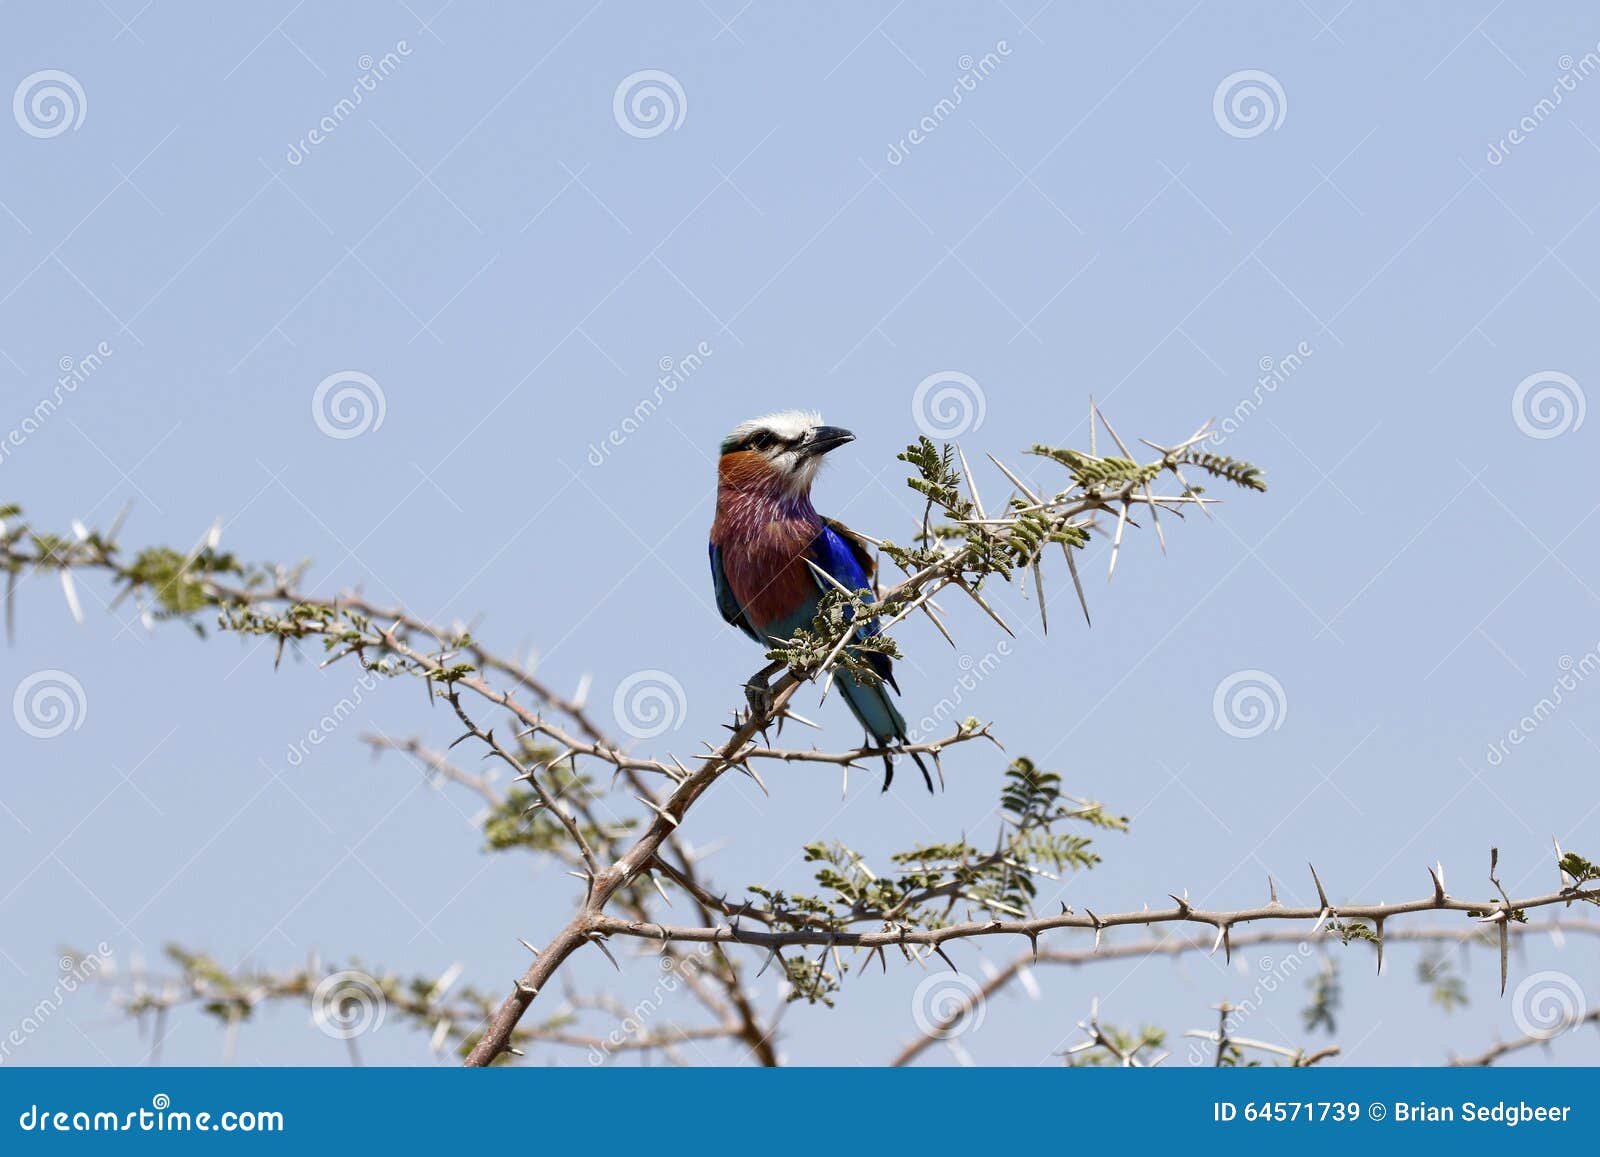 Lilac Breasted Roller Perched on Acacia Thorns Stock Image - Image of